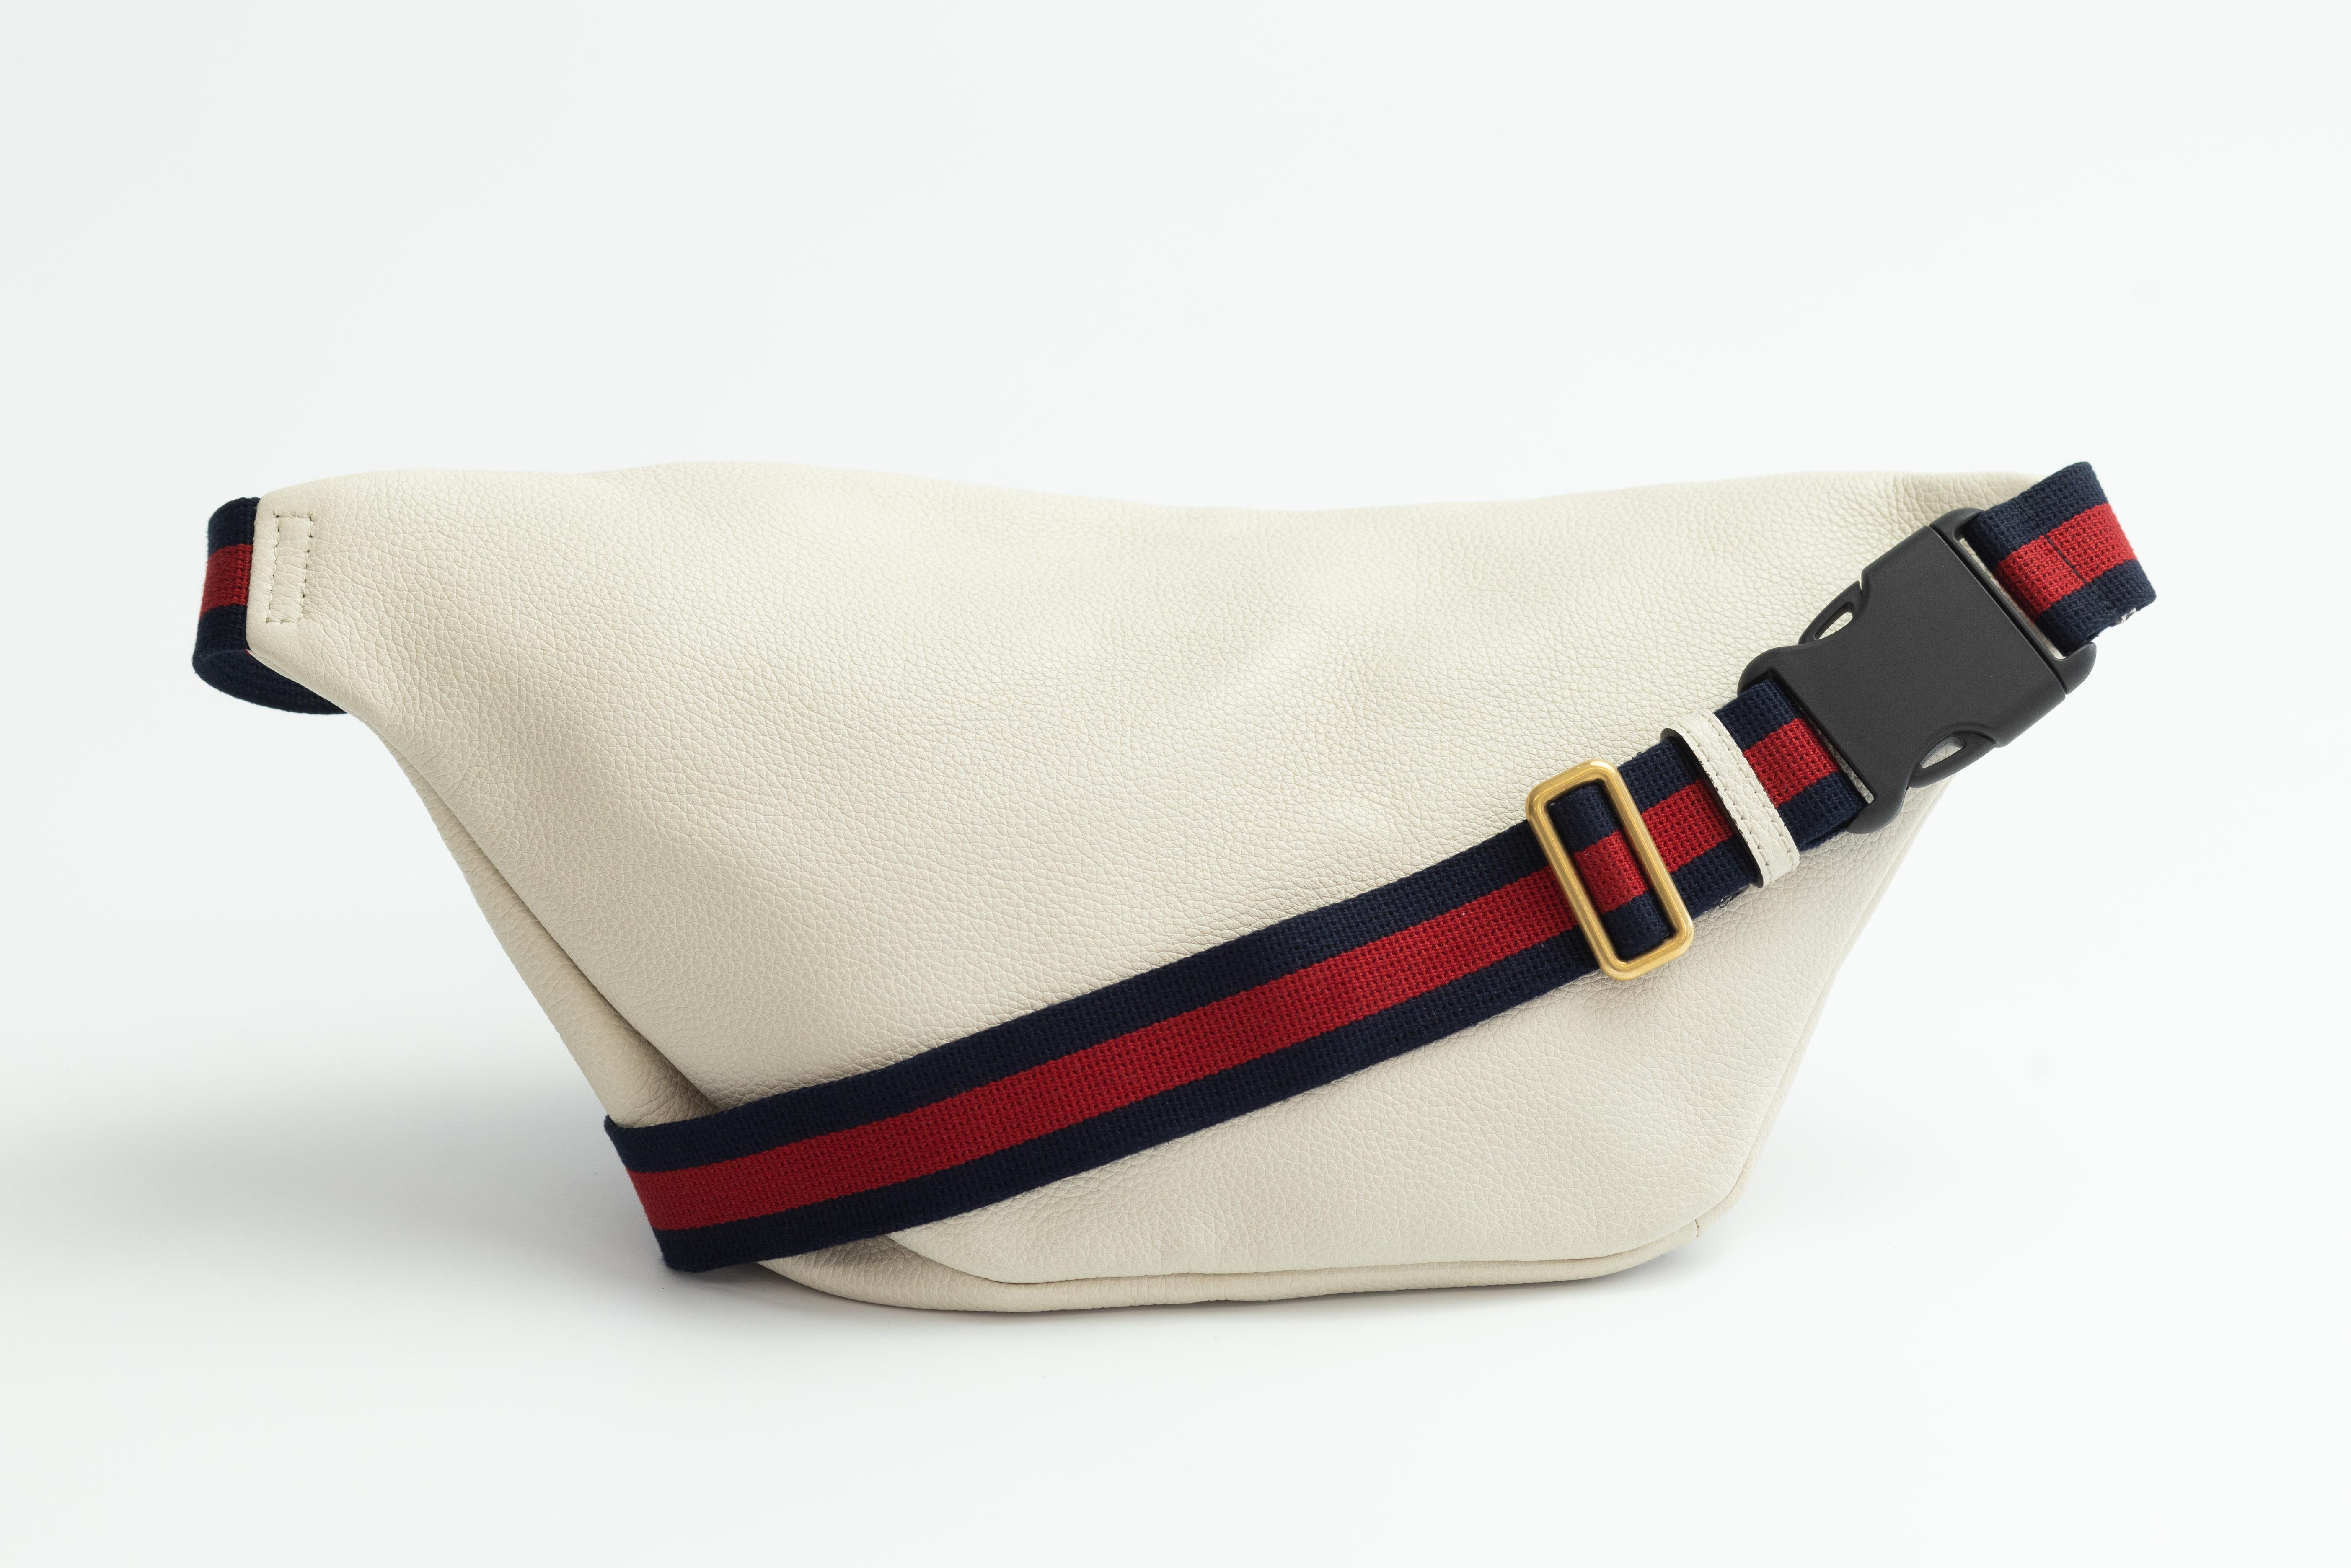 This belt bag is white leather with a vintage Gucci logo. This bag has a nylon navy and red adjustable web belt that can be worn as a belt bag on the hip or waist. The front zipper opens to a beige natural fiber interior.

Color: Off white
Material: